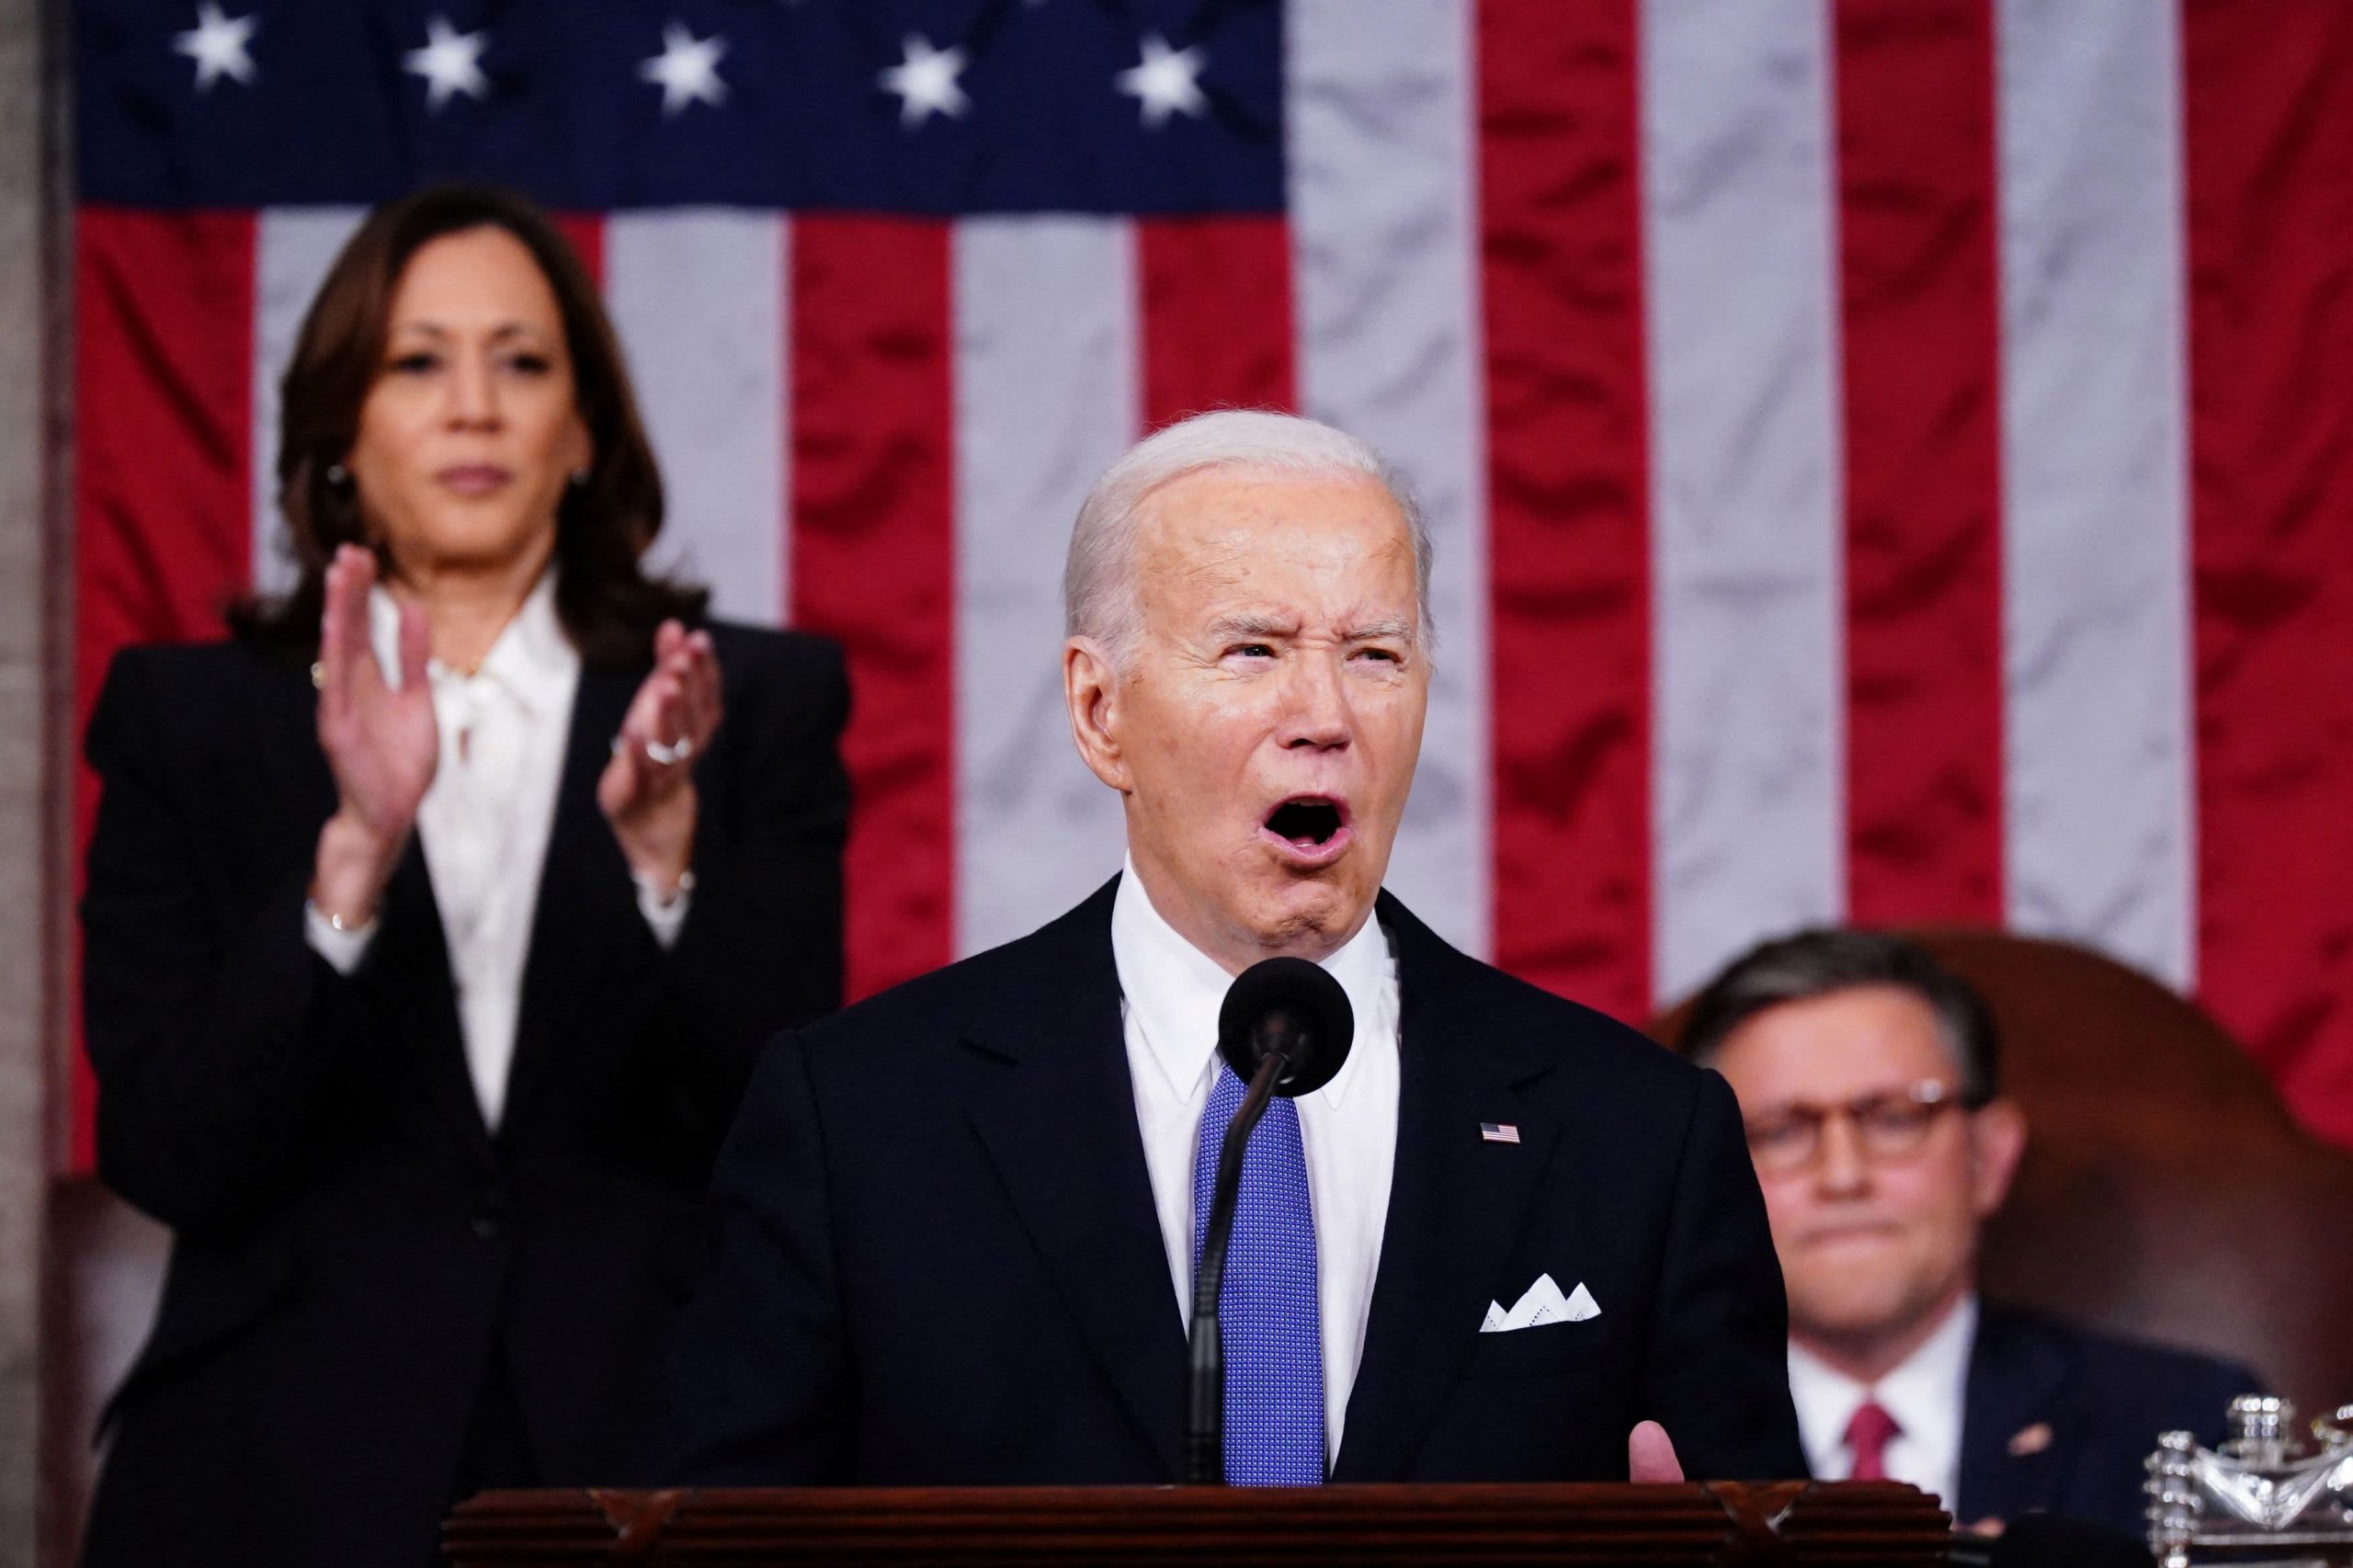 Biden Pledges to Safeguard Social Security and Medicare, Calls for Wealthy to Pay Fair Share